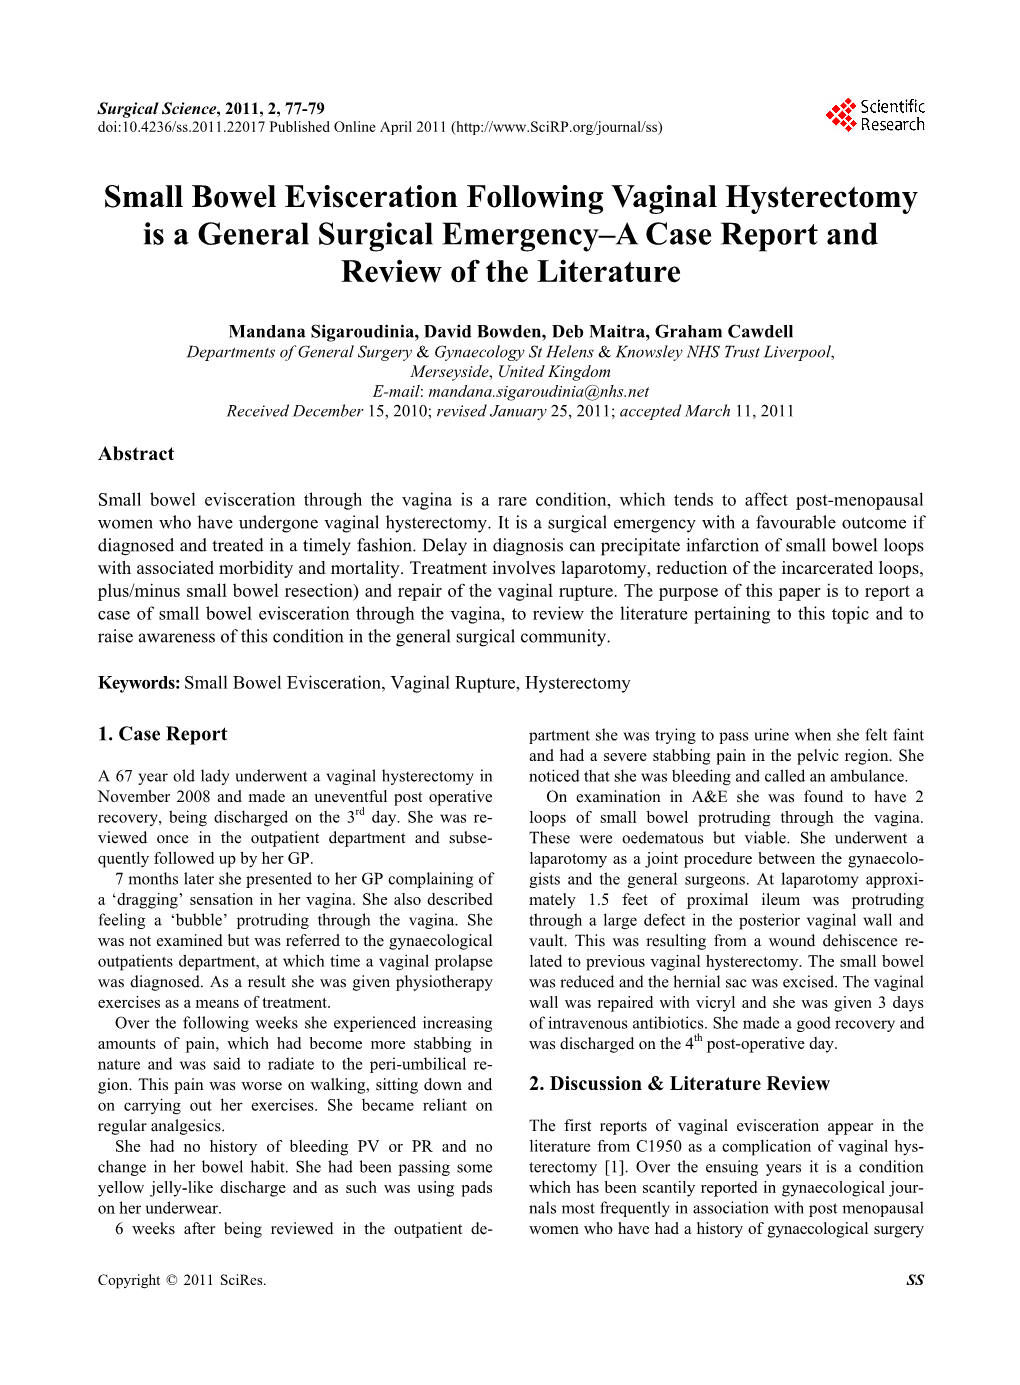 Small Bowel Evisceration Following Vaginal Hysterectomy Is a General Surgical Emergency–A Case Report and Review of the Literature